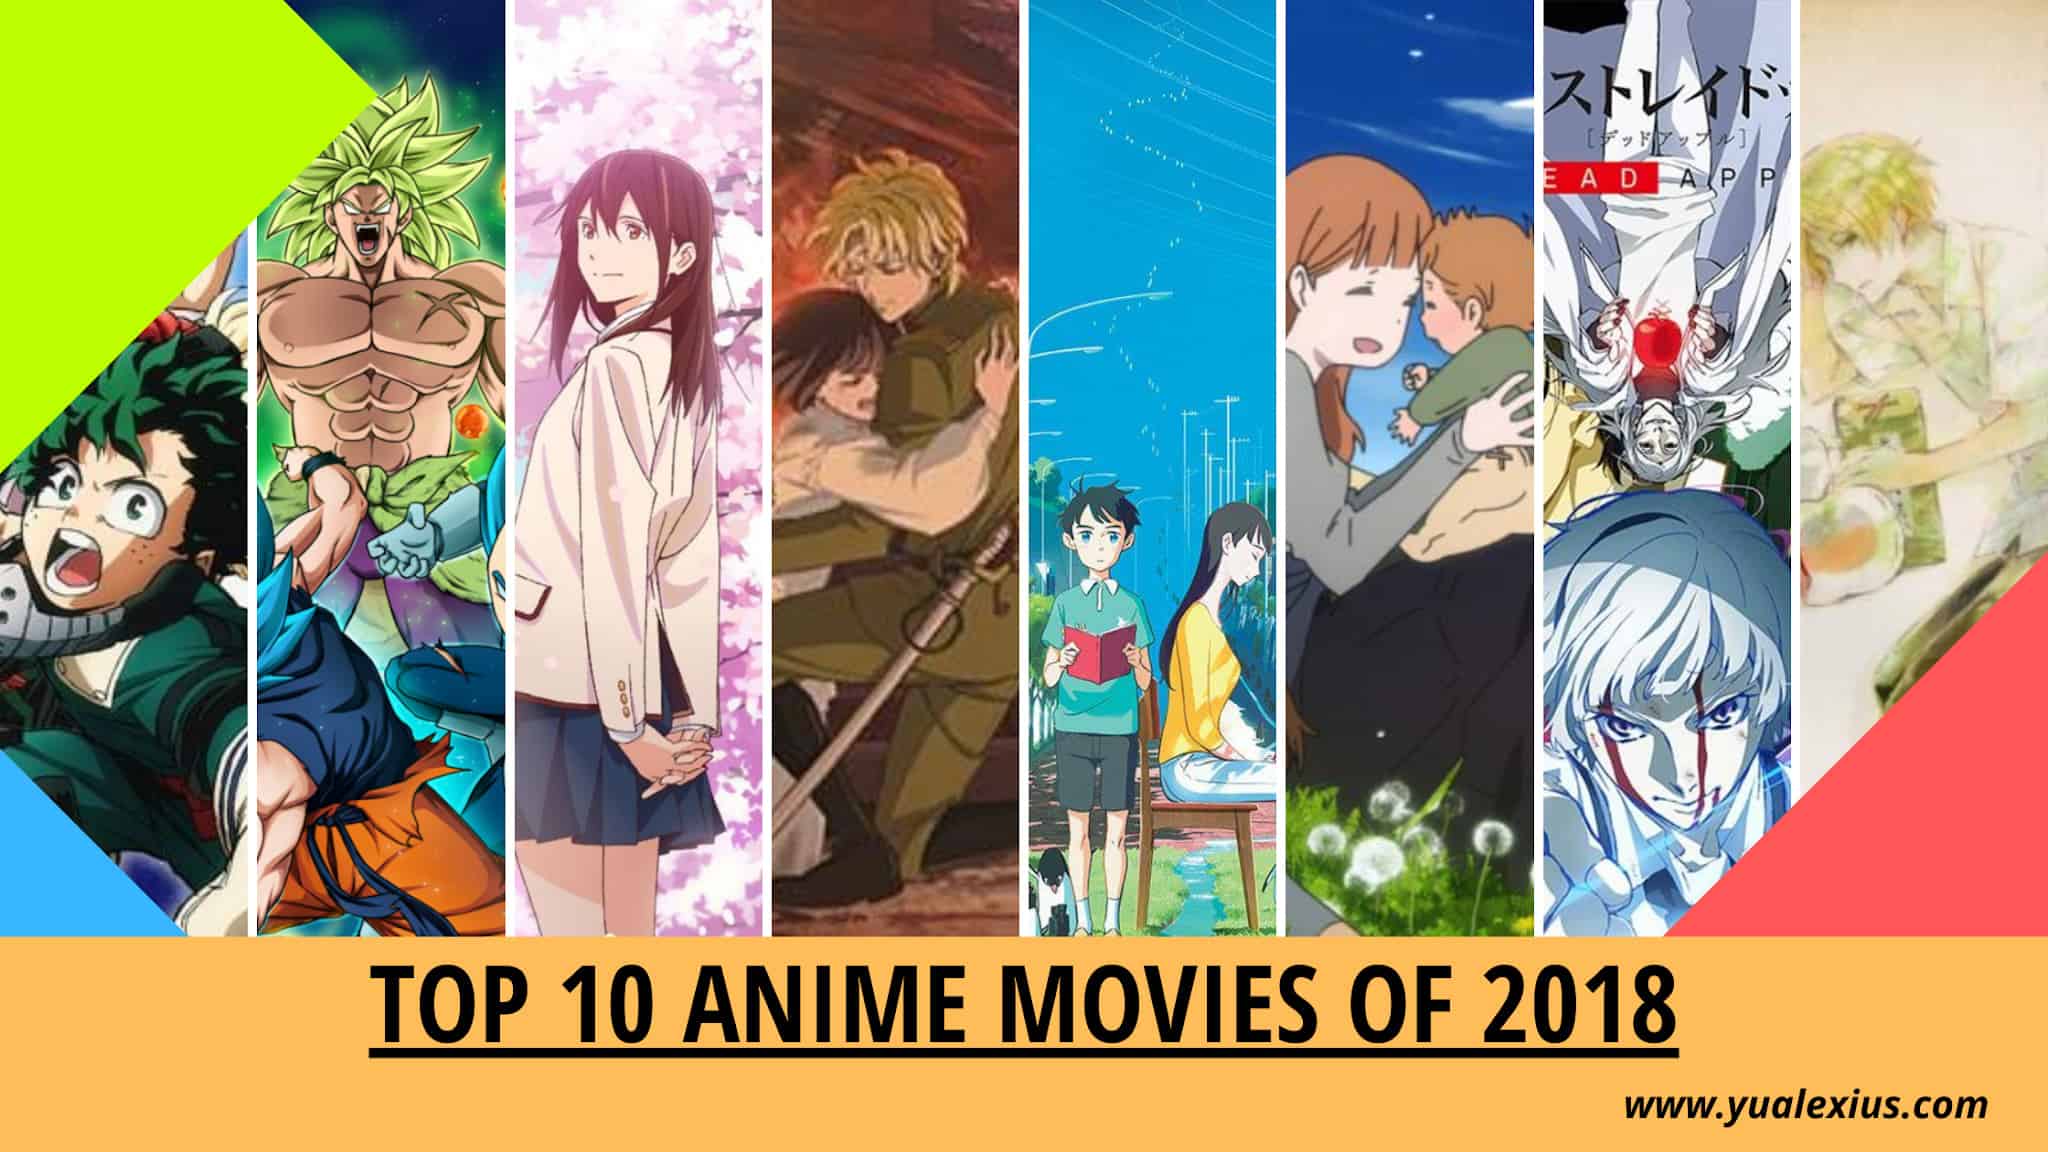 Top 10 Anime Movies Of 2018 That Fans Should Watch  Yu Alexius